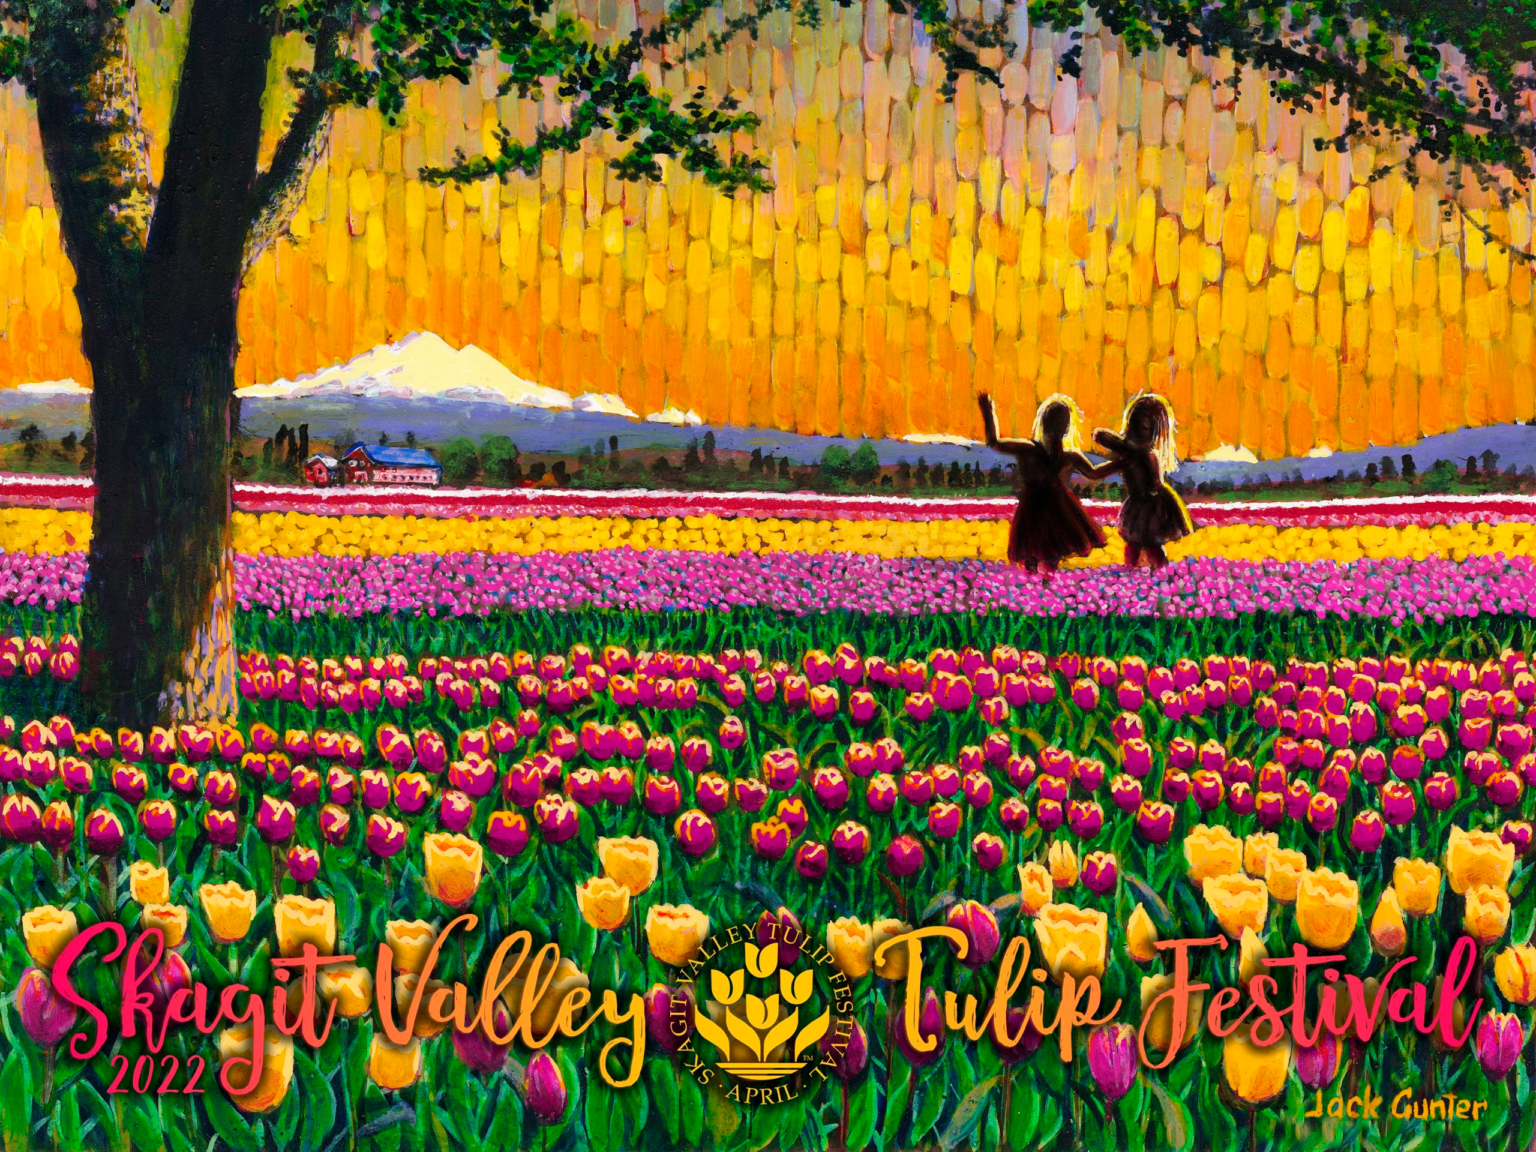 Painter Jack Gunter created the official poster for the 2022 Skagit Valley Tulip Festival